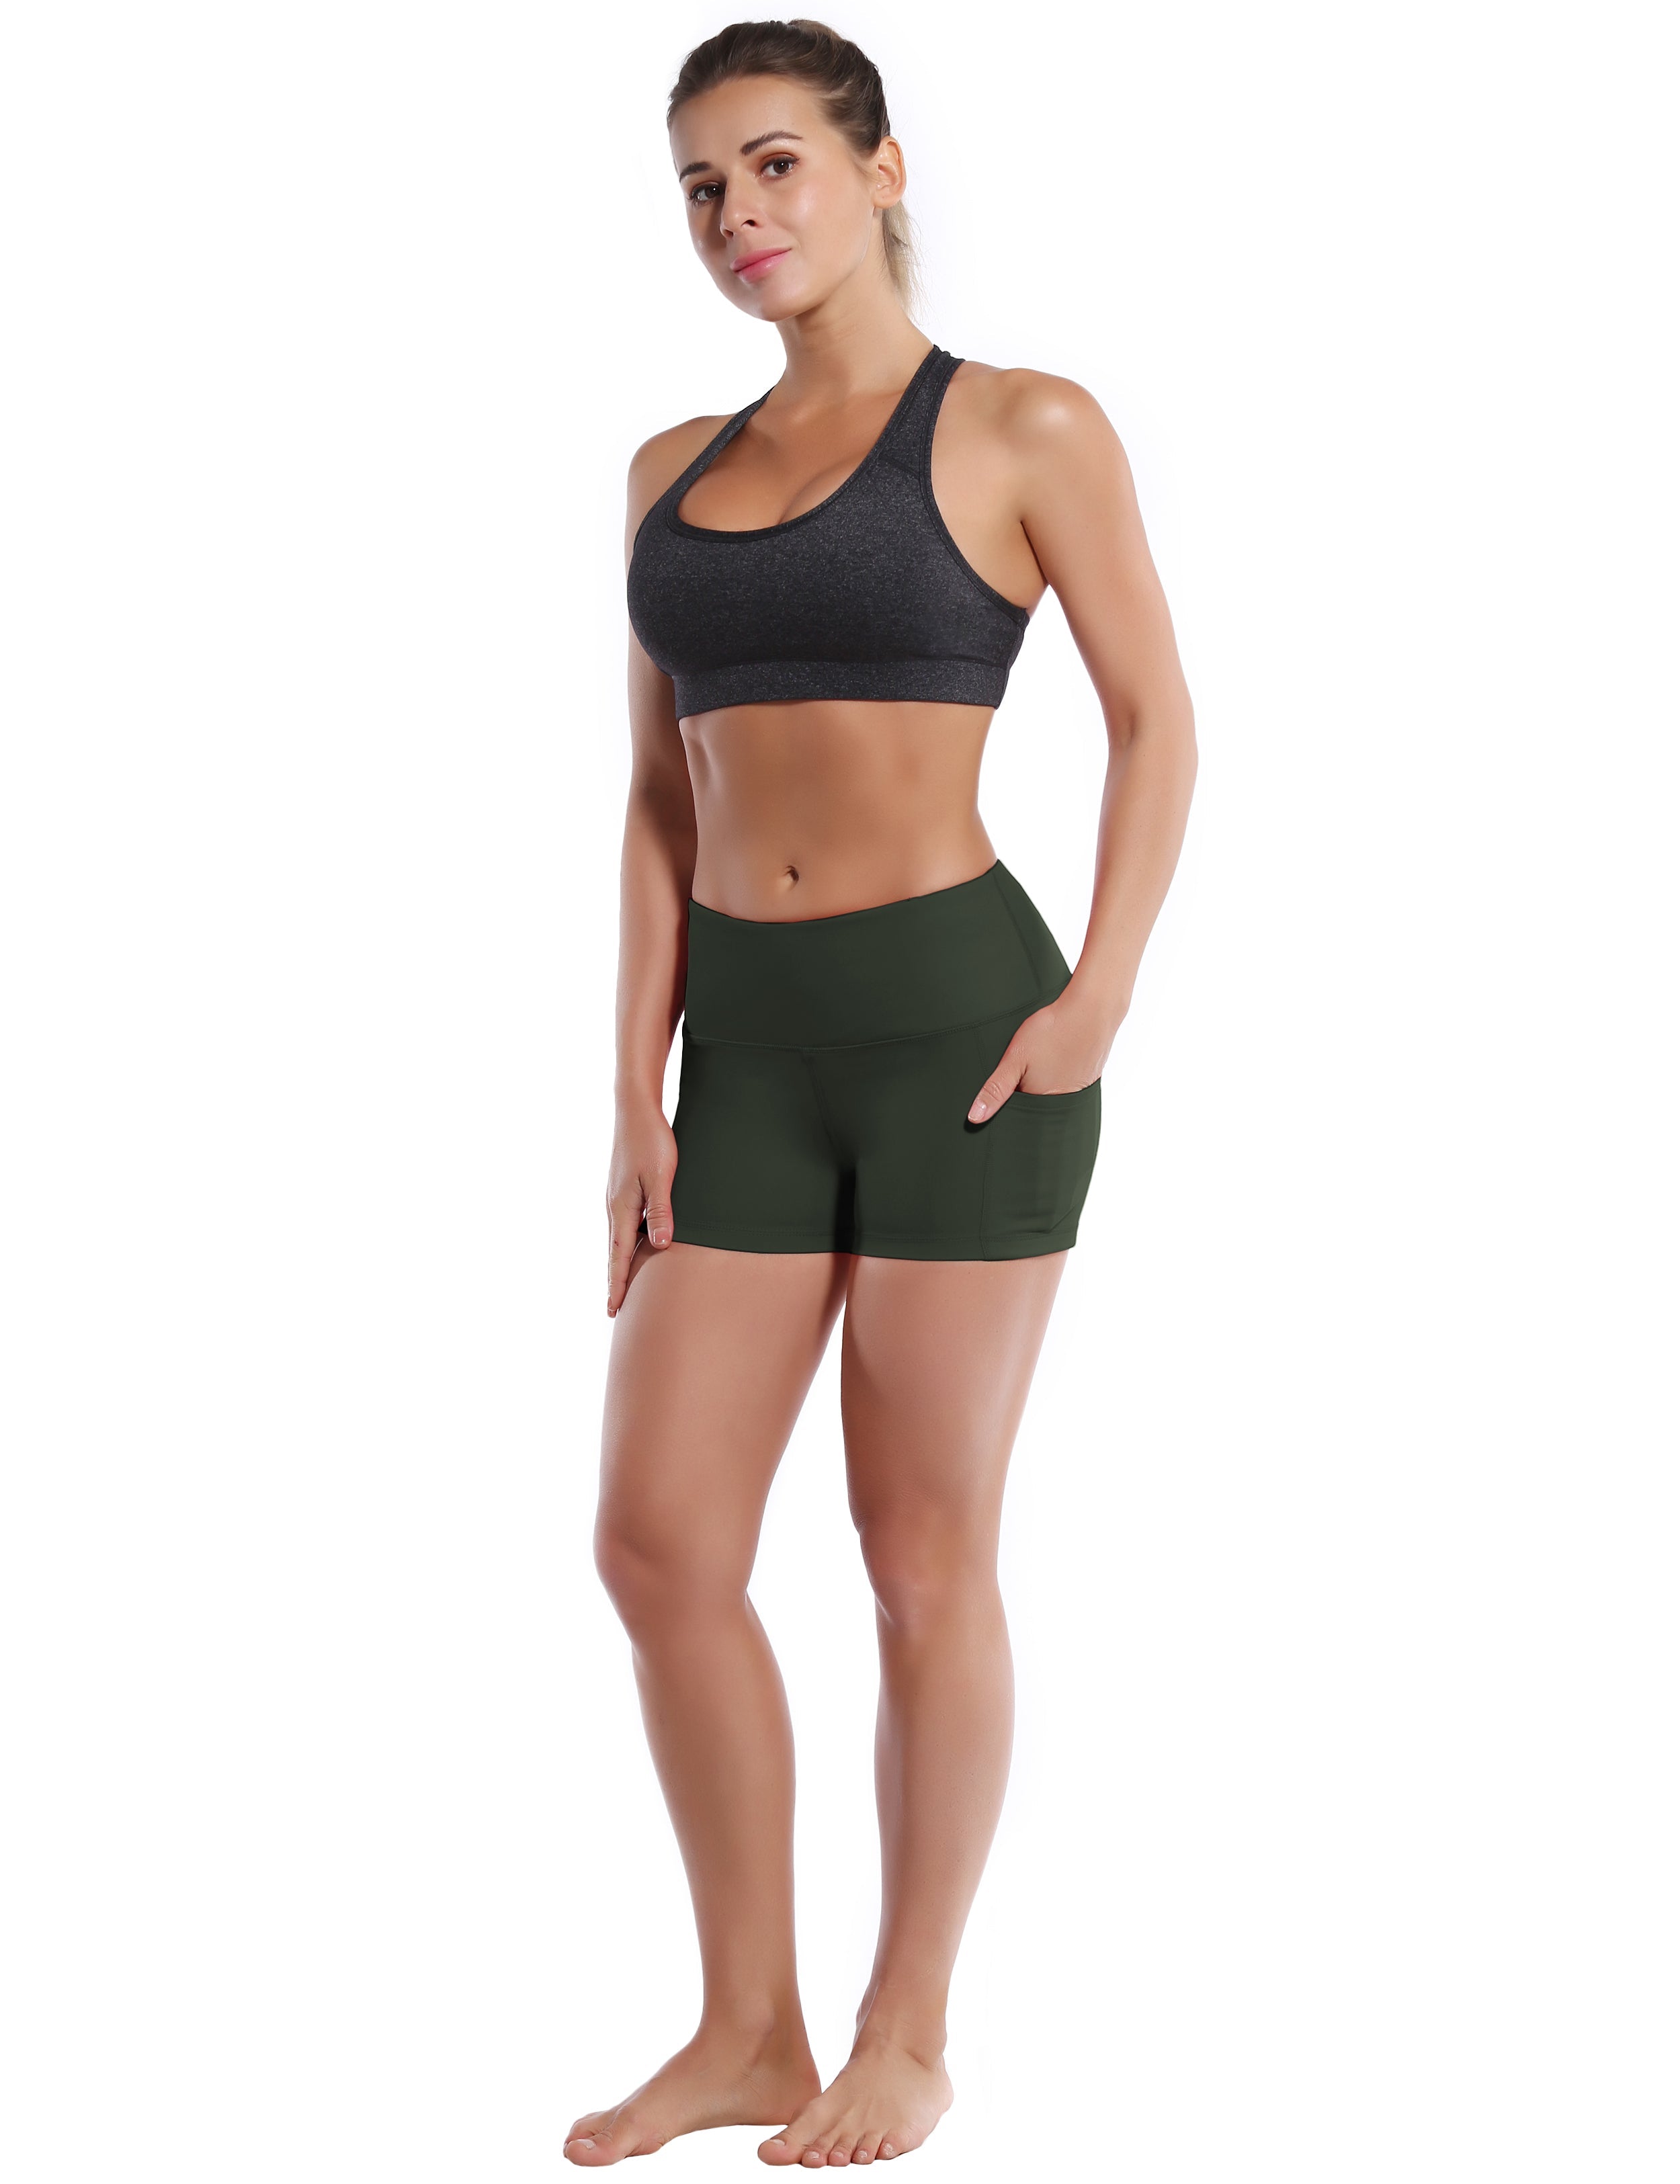 2.5" Side Pockets Jogging Shorts olivegray Sleek, soft, smooth and totally comfortable: our newest sexy style is here. Softest-ever fabric High elasticity High density 4-way stretch Fabric doesn't attract lint easily No see-through Moisture-wicking Machine wash 78% Polyester, 22% Spandex